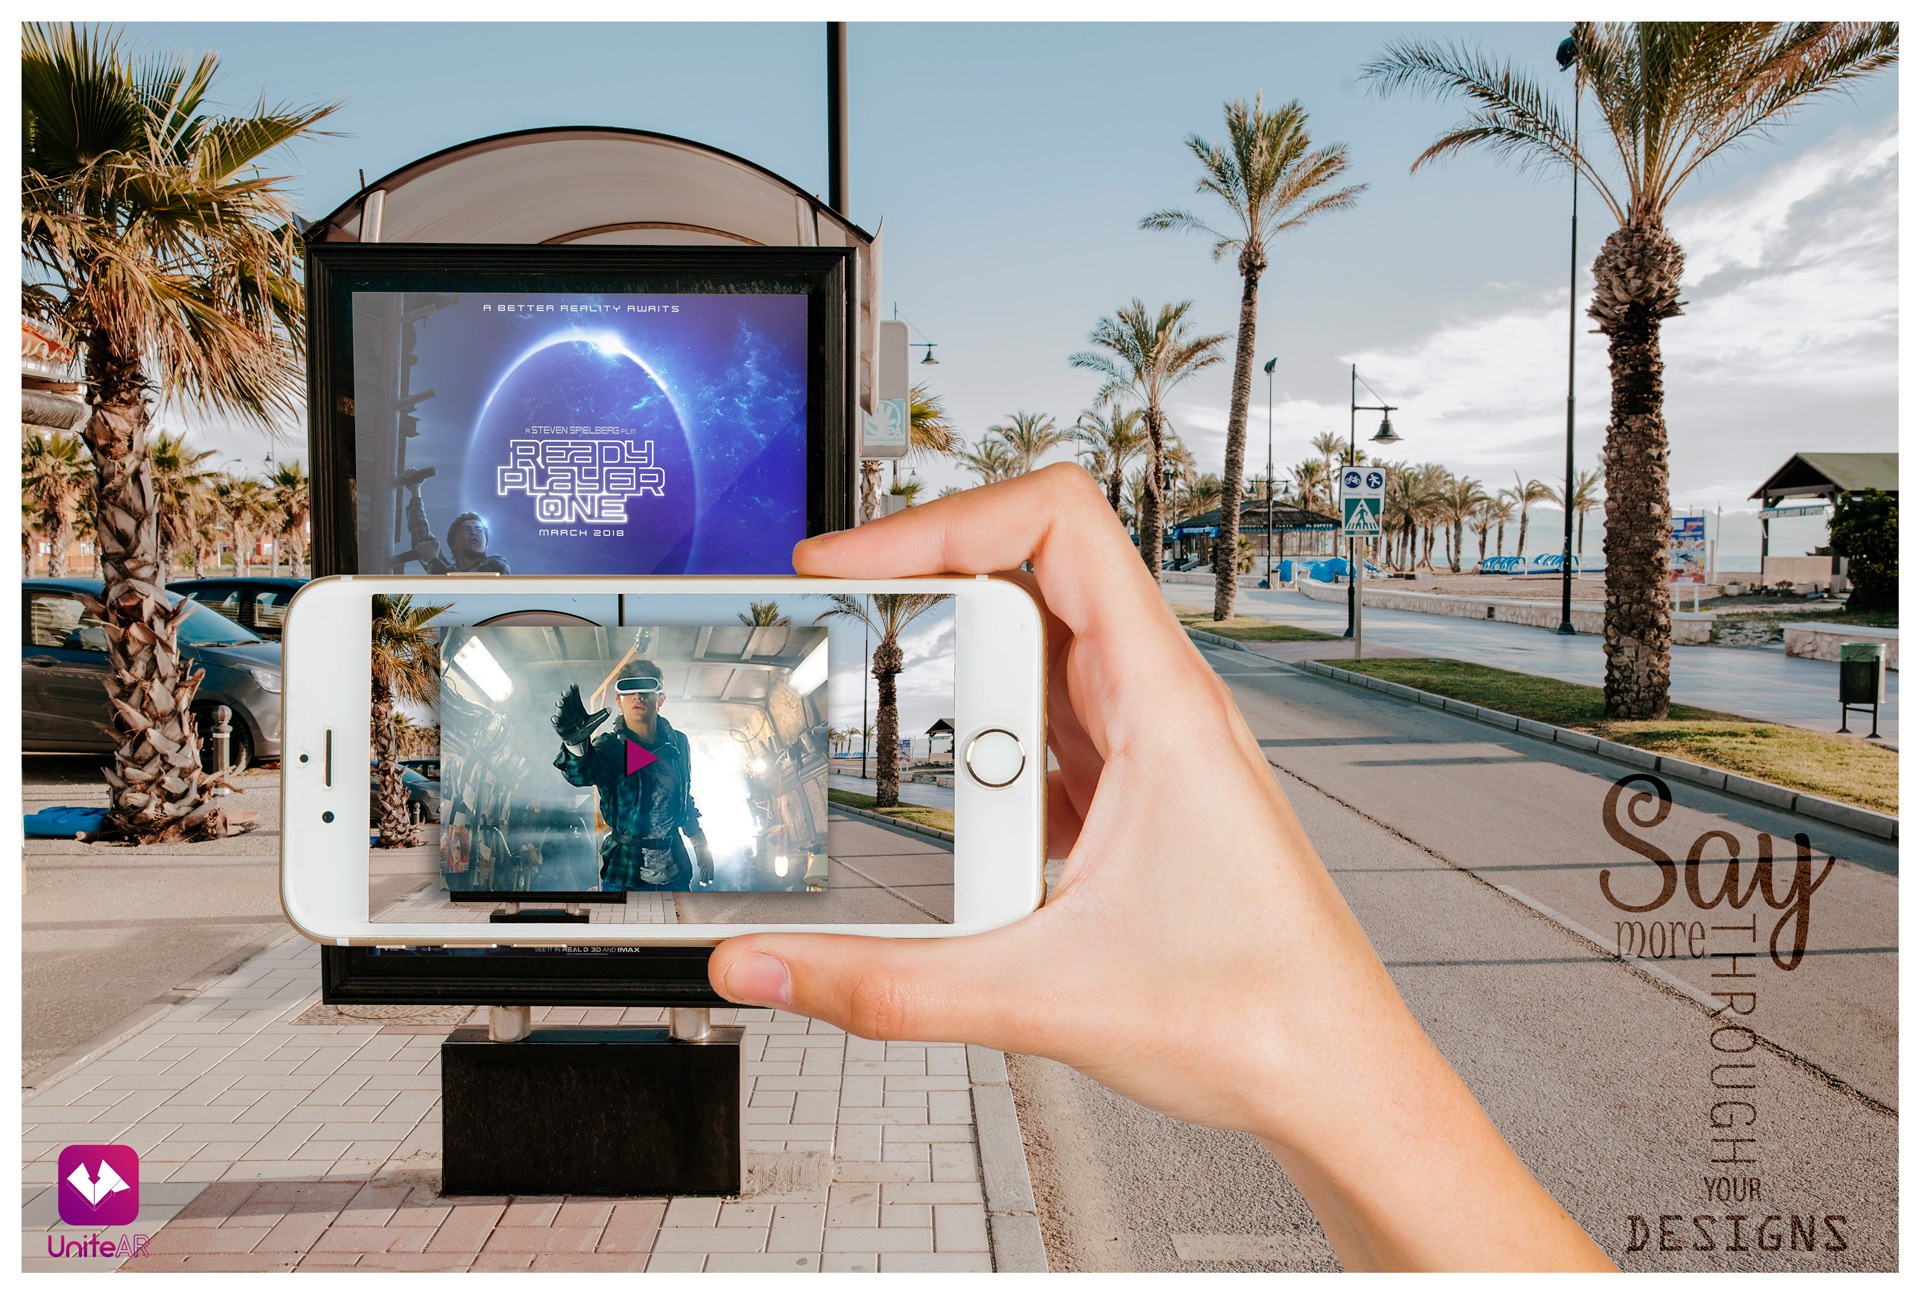 Augmented reality in marketing and advertising
                       